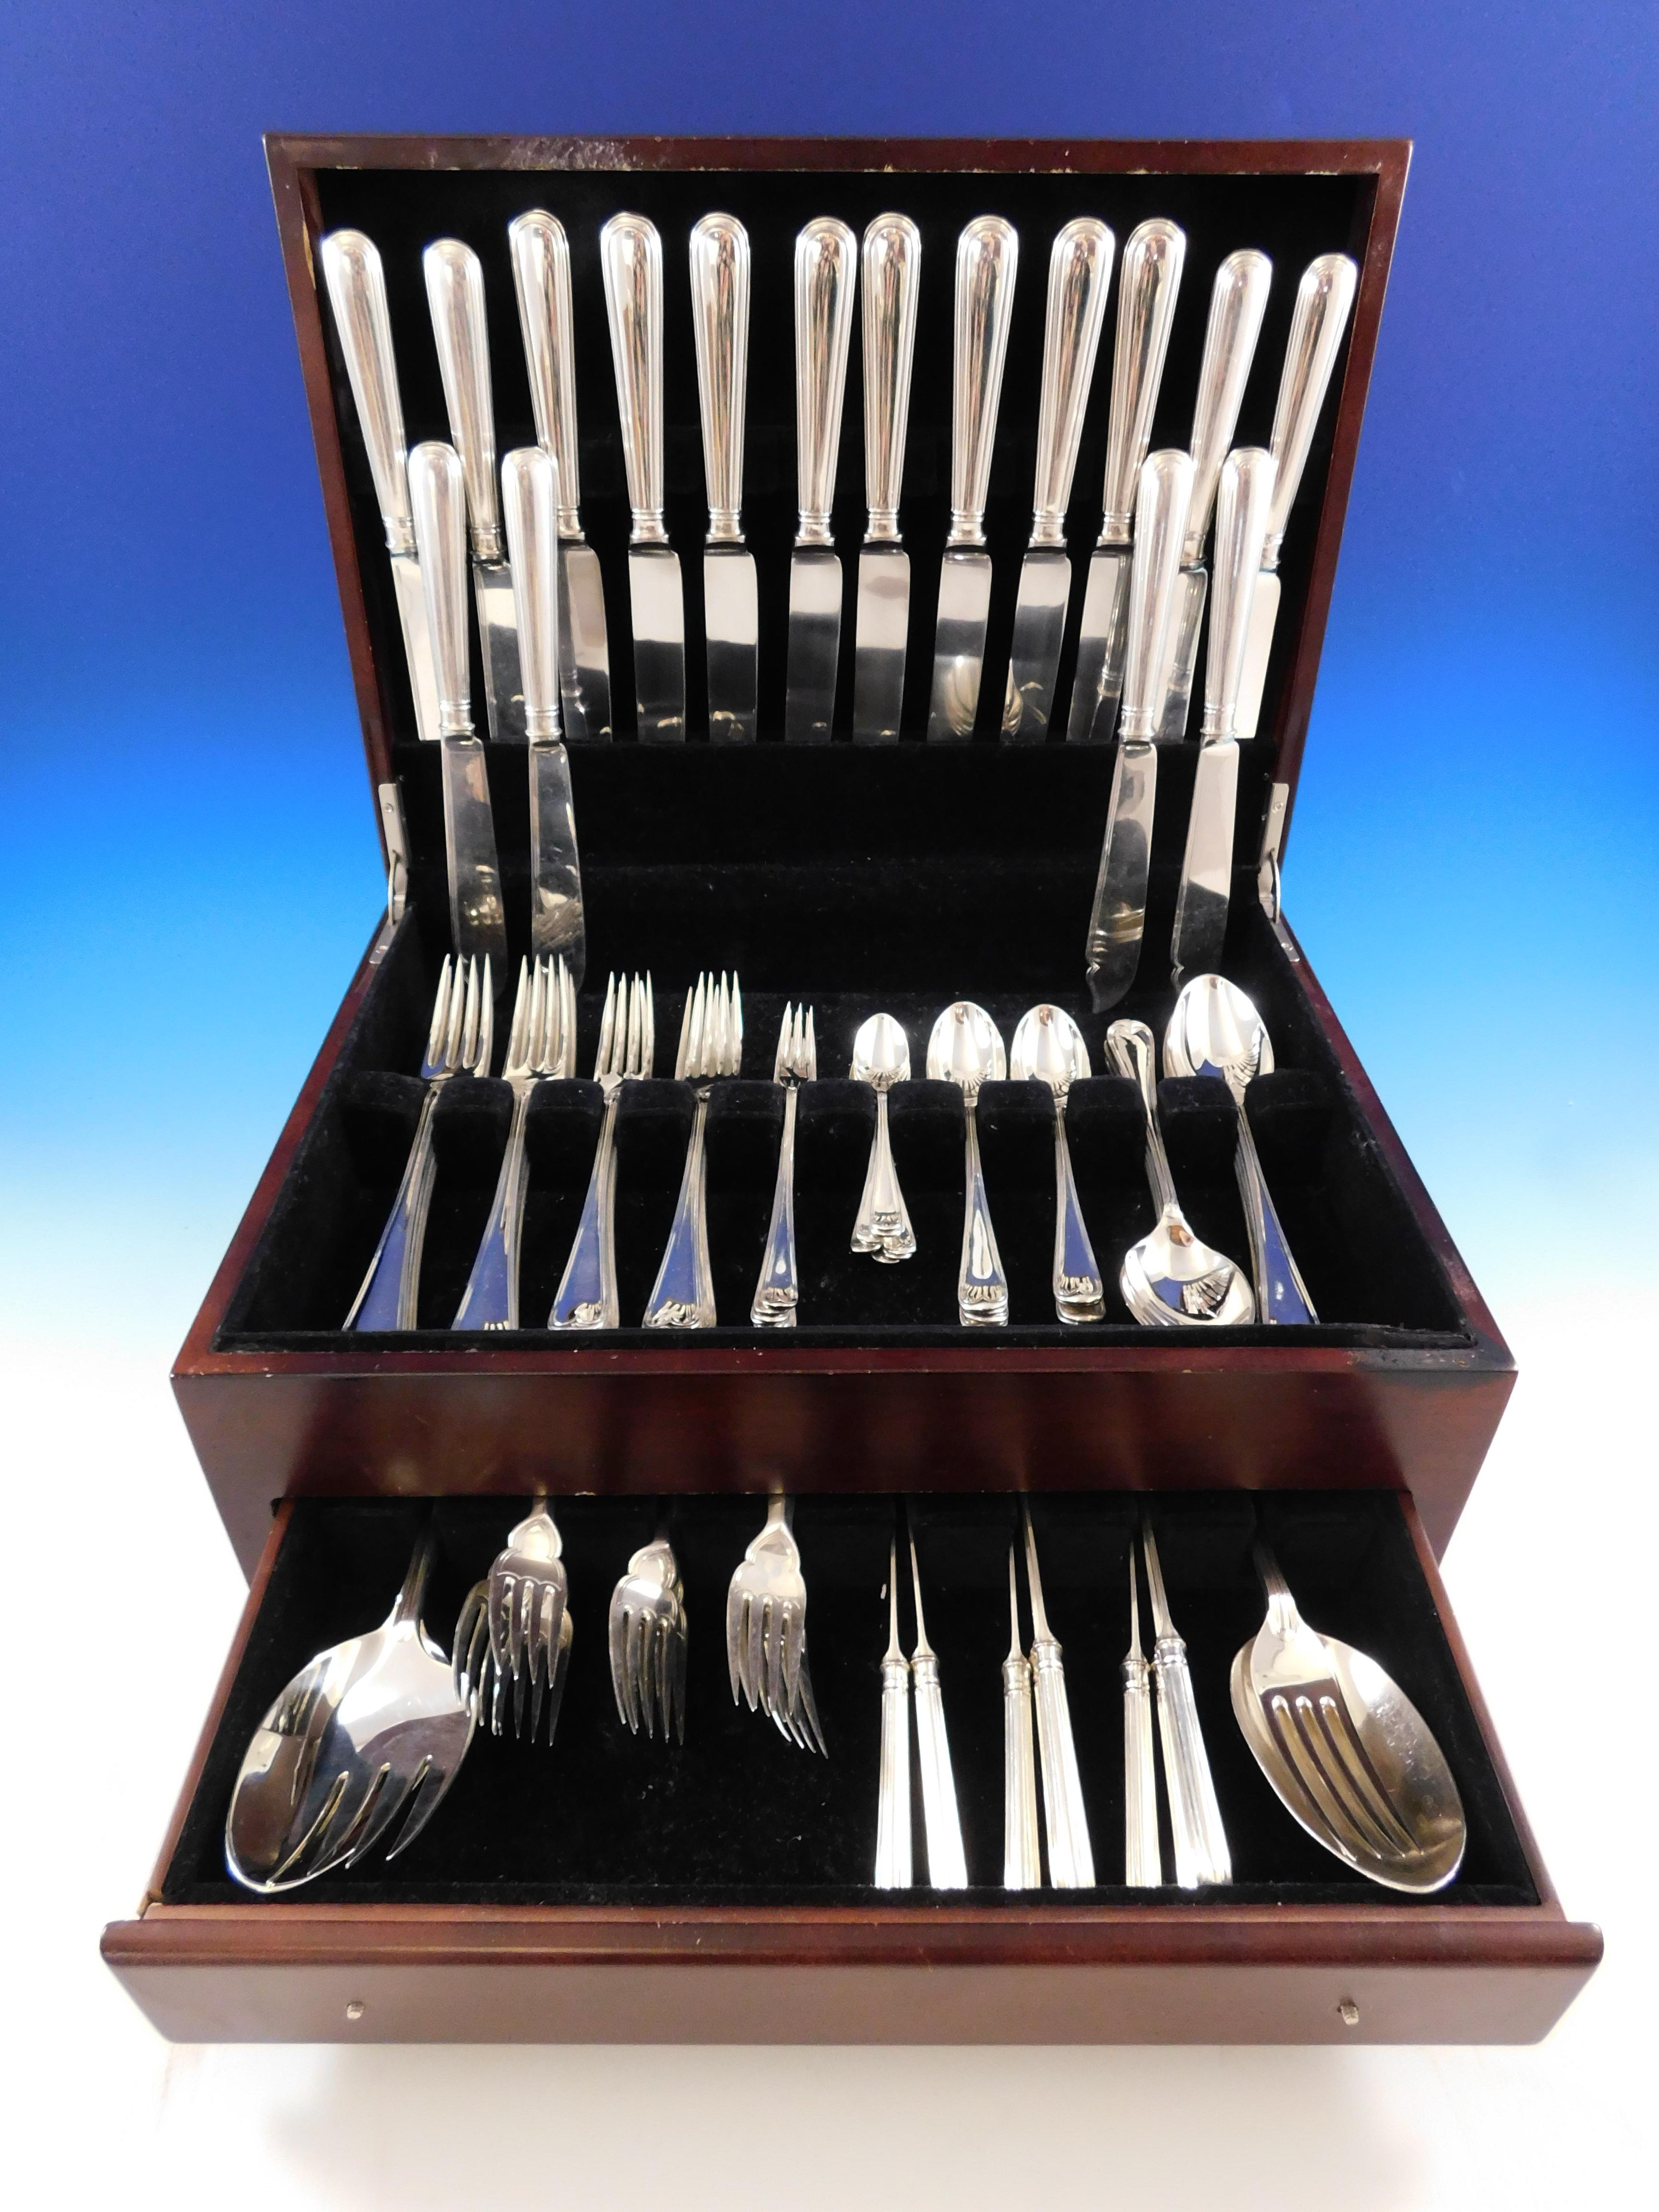 For 70 years, James Robinson has been selling exquisite handmade sterling silver flatware in Sheffield, England. Today, the silver is still made in the traditional way. They start with a rectangular strip of silver, then forge, hammer, file, shape,